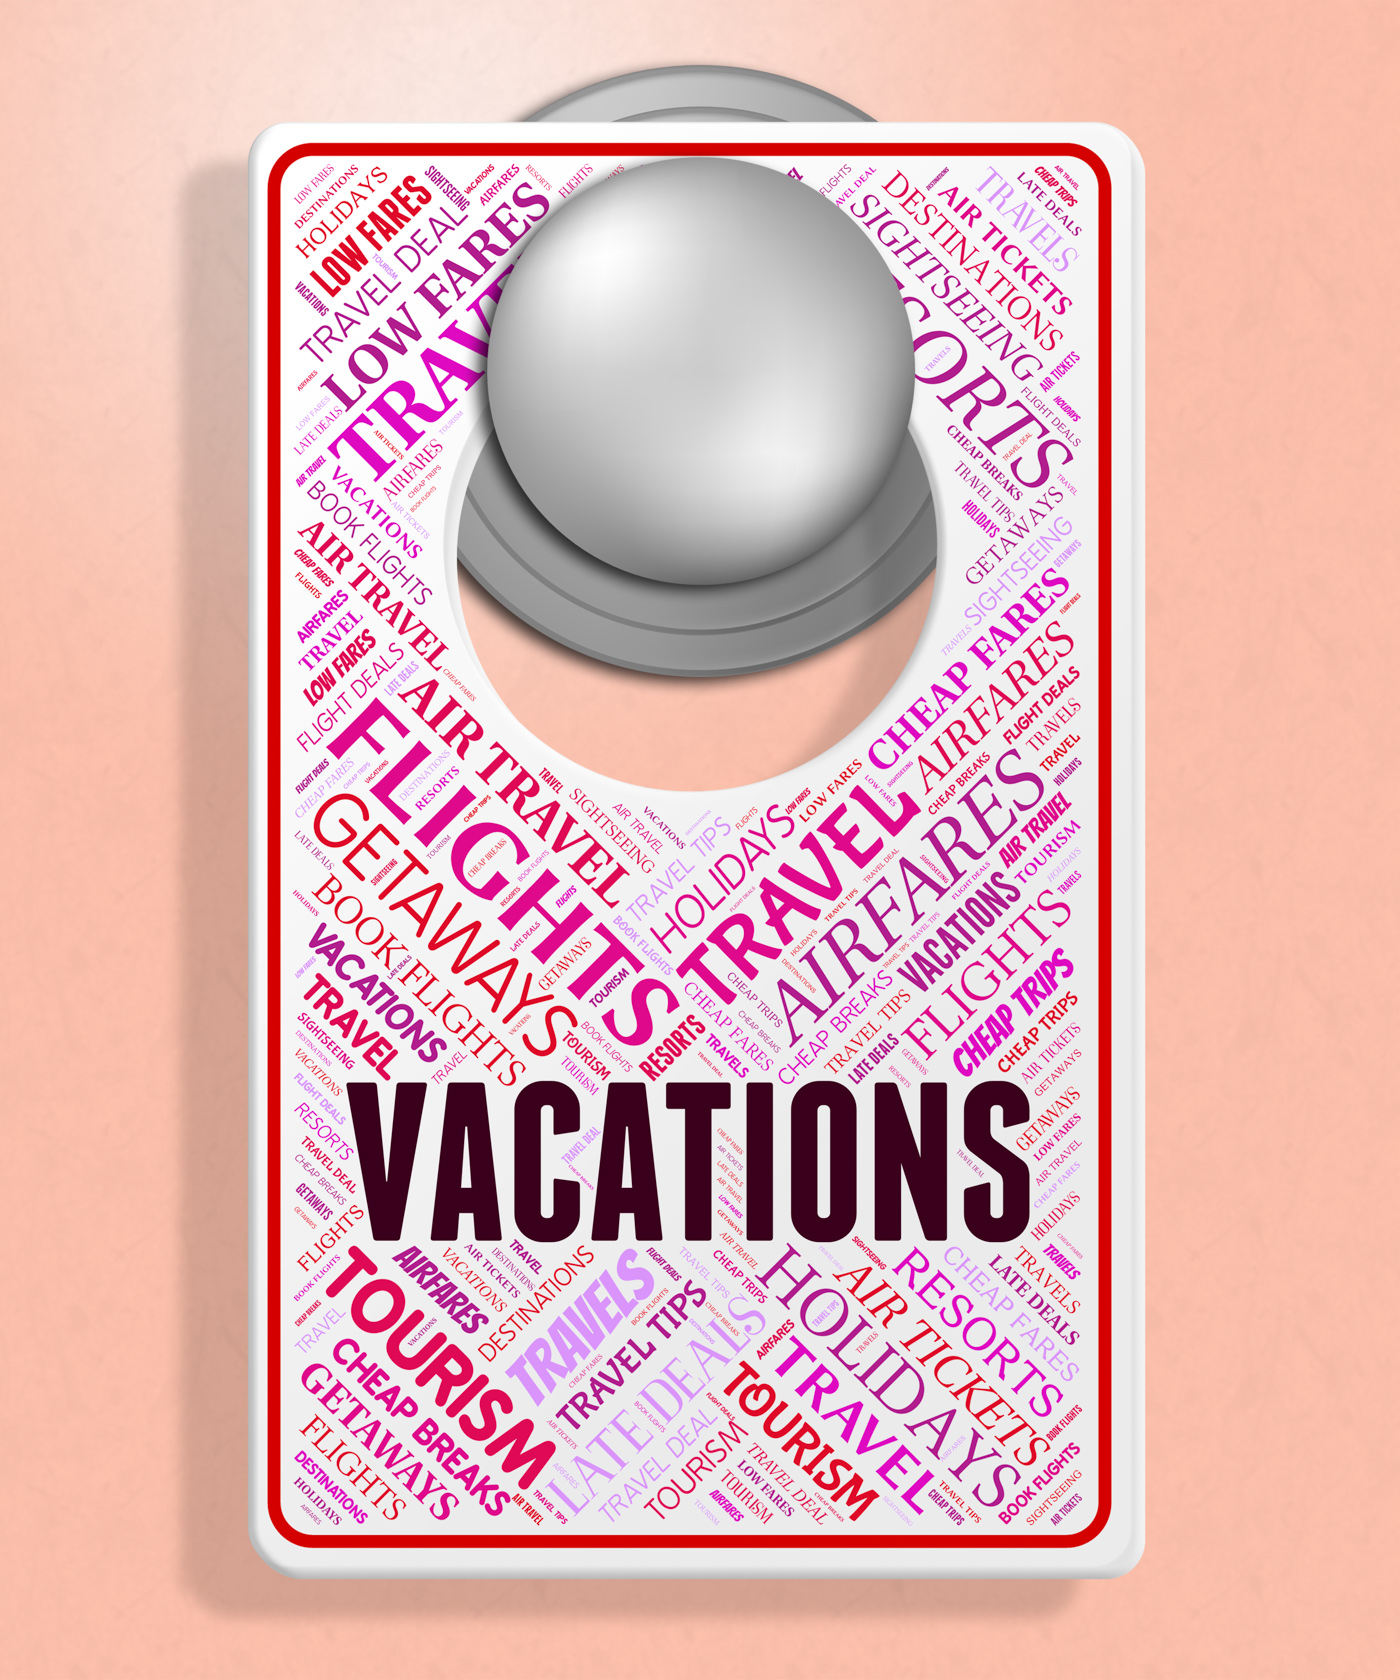 Vacations sign means signboard message and placard photo